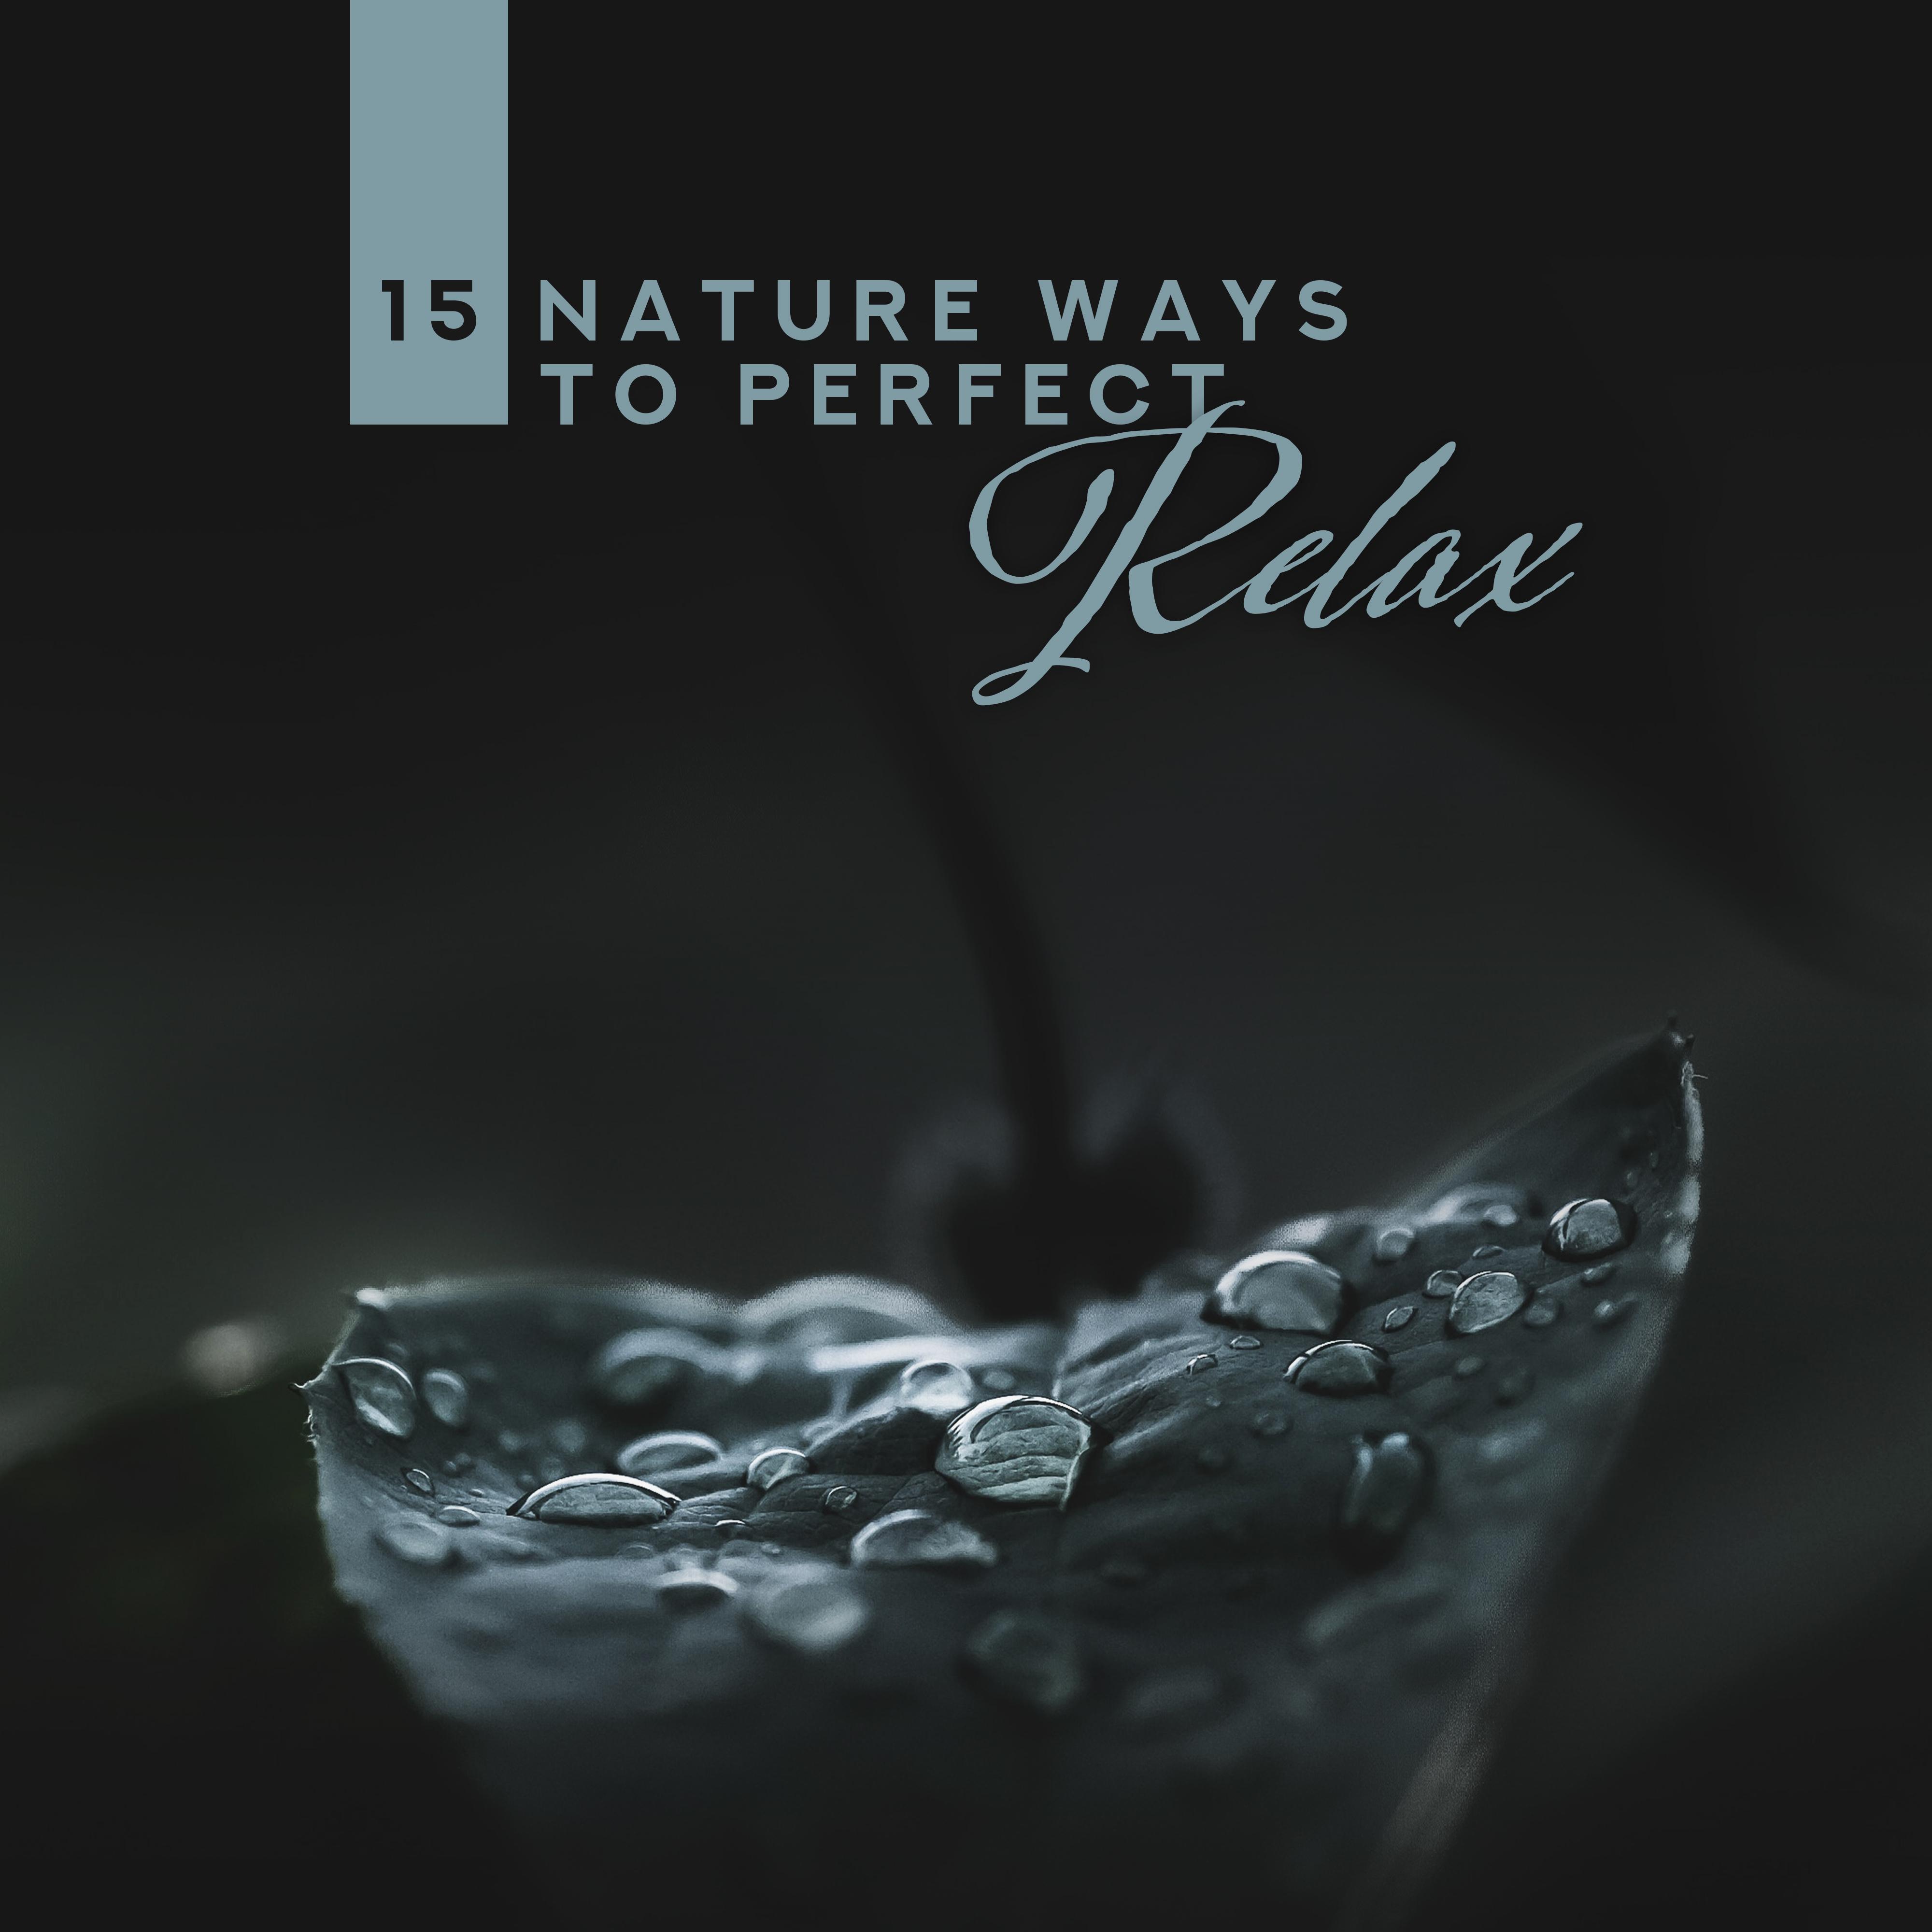 15 Nature Ways to Perfect Relax: 2019 New Age Soothing Music, Most Relaxing Natue Sounds of Birds & Water with Piano Melodies, Songs to Calm Down, Stress Relief, Perfect Rest